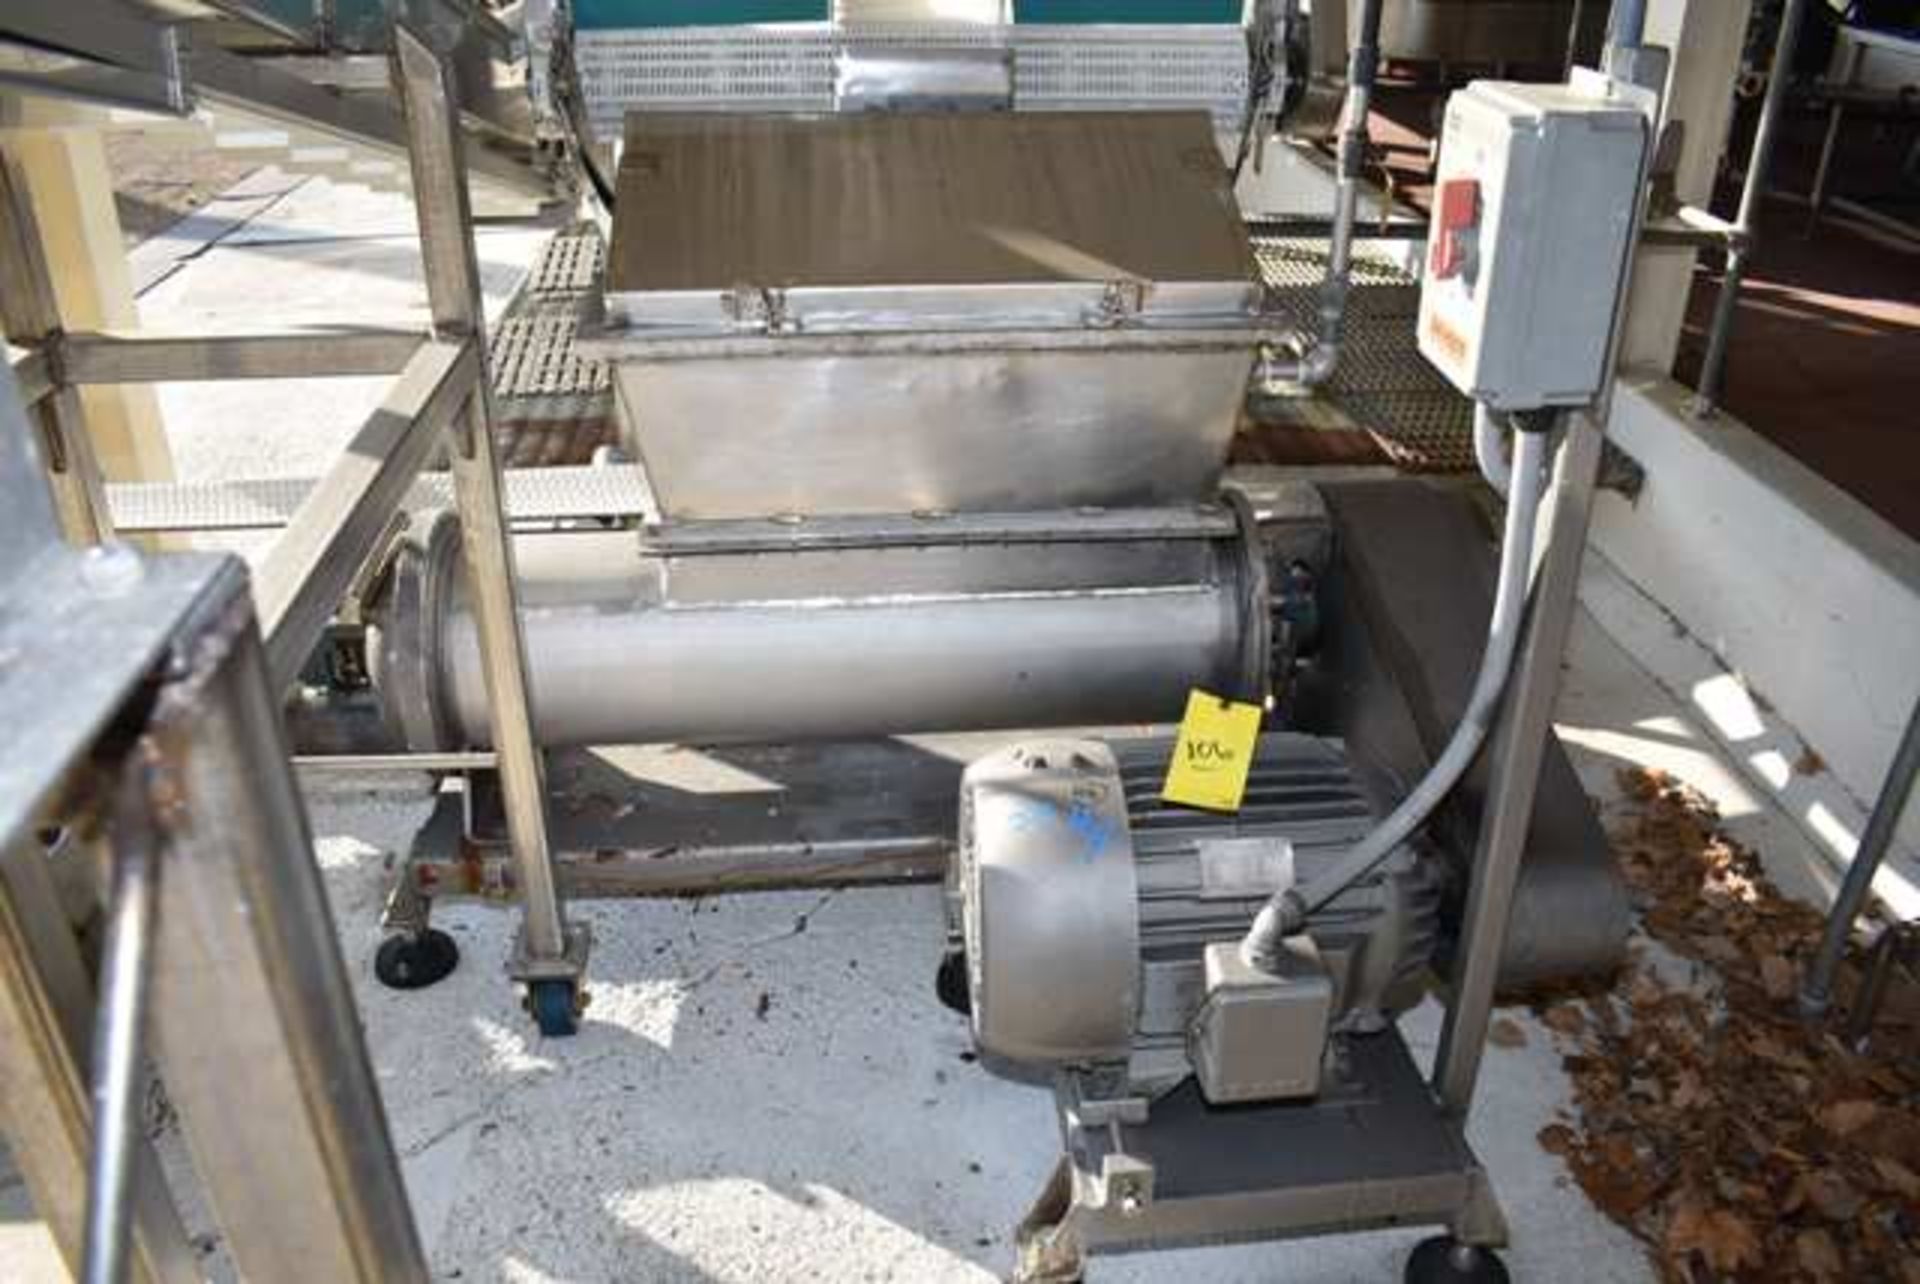 FMC, TC-40, Stainless Steel 30HP, Tomato Chopper, Loading Fee: $250 - Image 2 of 3